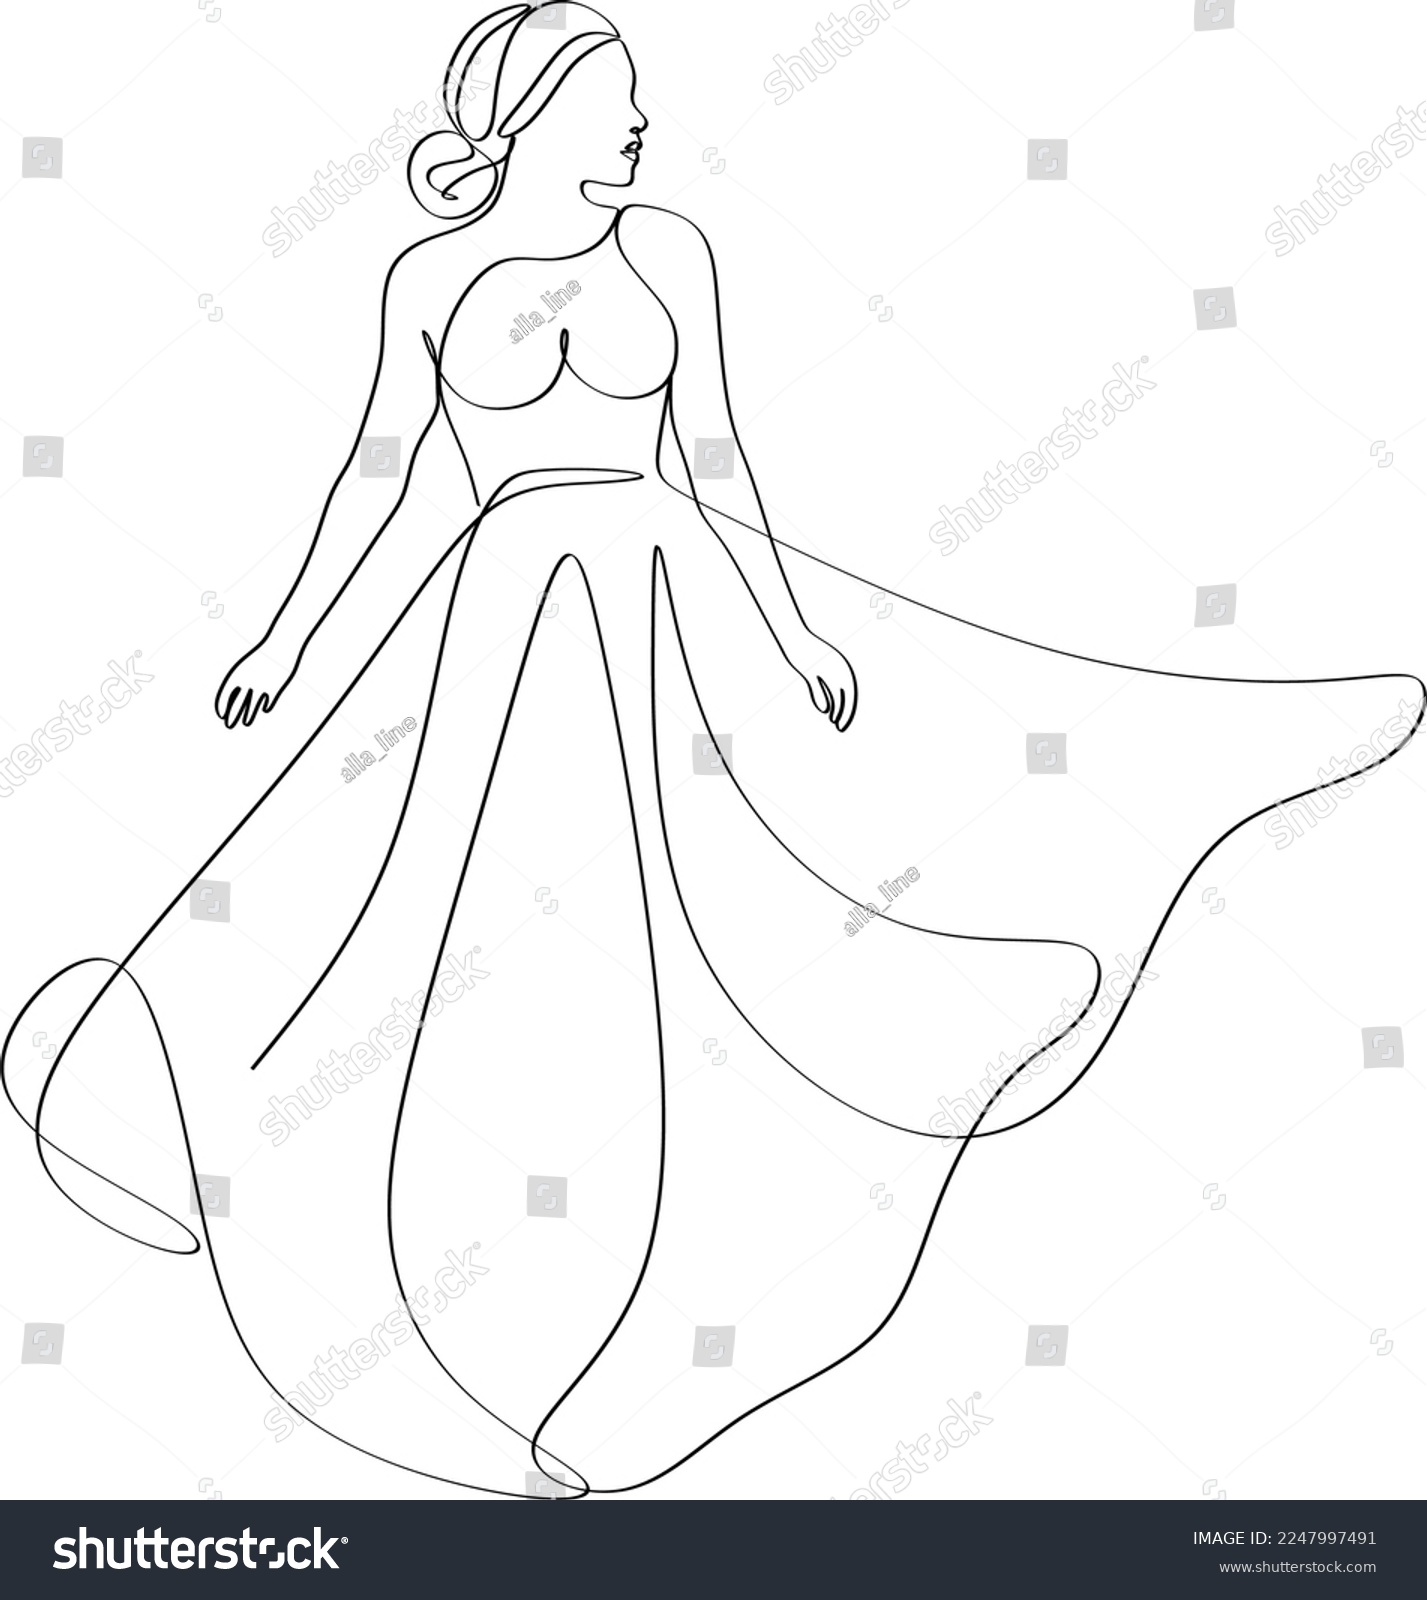 SVG of Beautiful woman in long flowing dress in continuous line art drawing style. Girl wearing luxury evening or bridal gown. Minimalist black linear sketch isolated on white background. Vector illustration svg